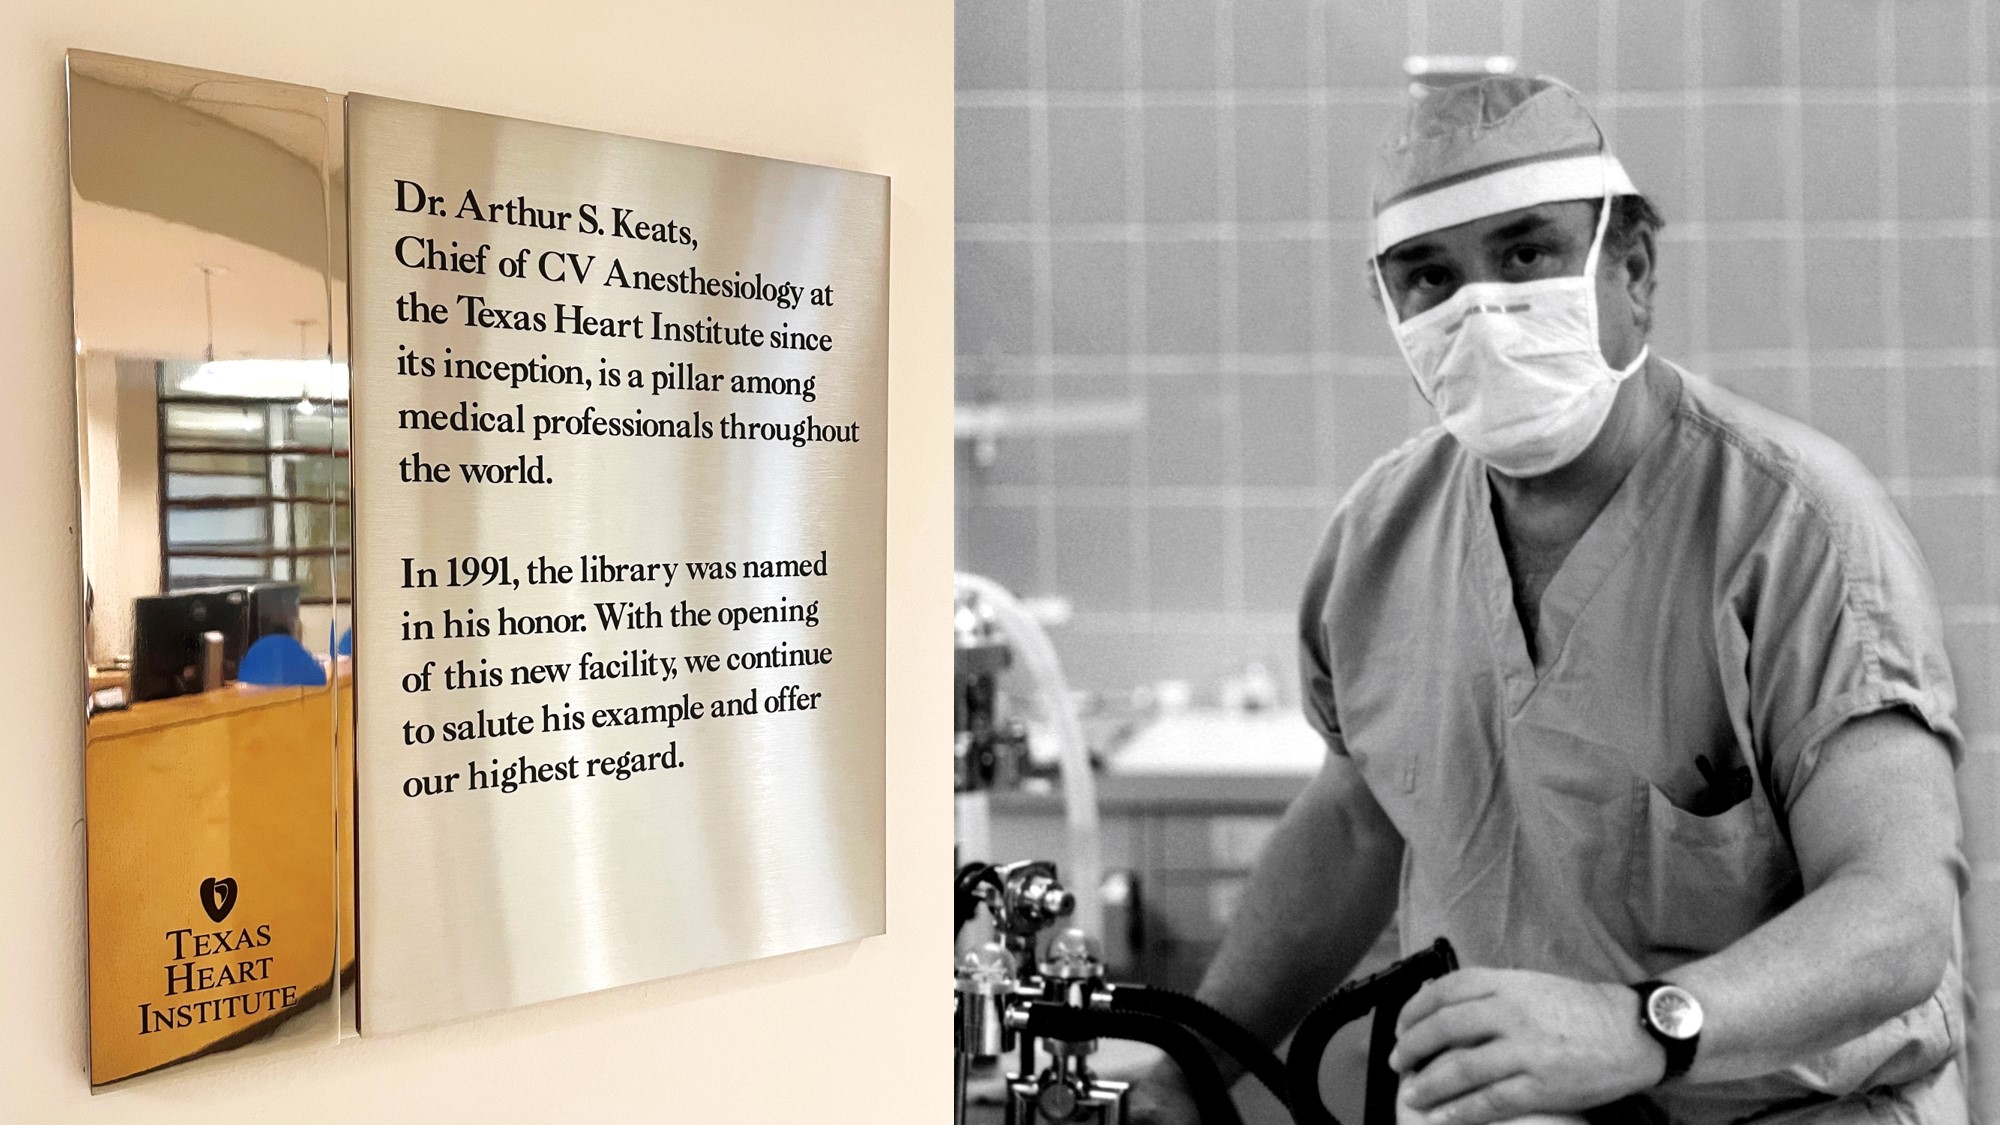 Plaque honoring Dr. Keats next to black and white photo of Anesthetist Keats wearing a surgical mask in the operating room